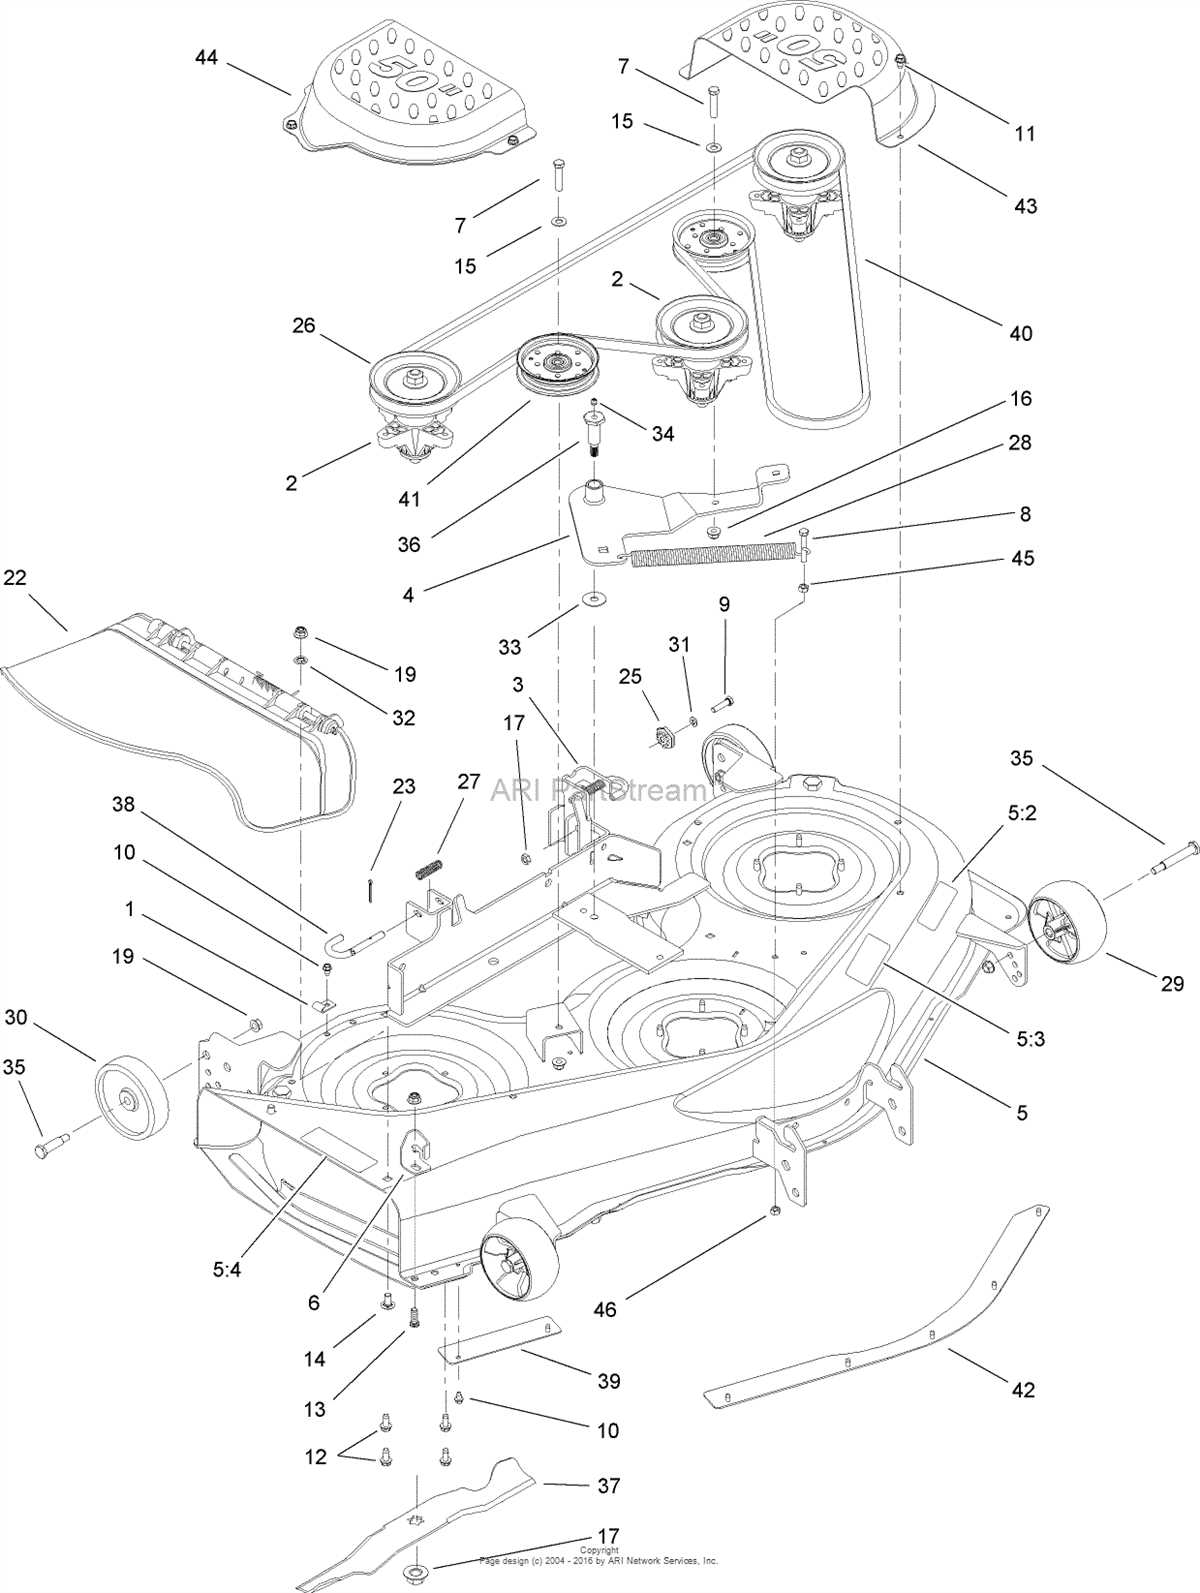 Common Toro Riding Mower Parts and Their Functions